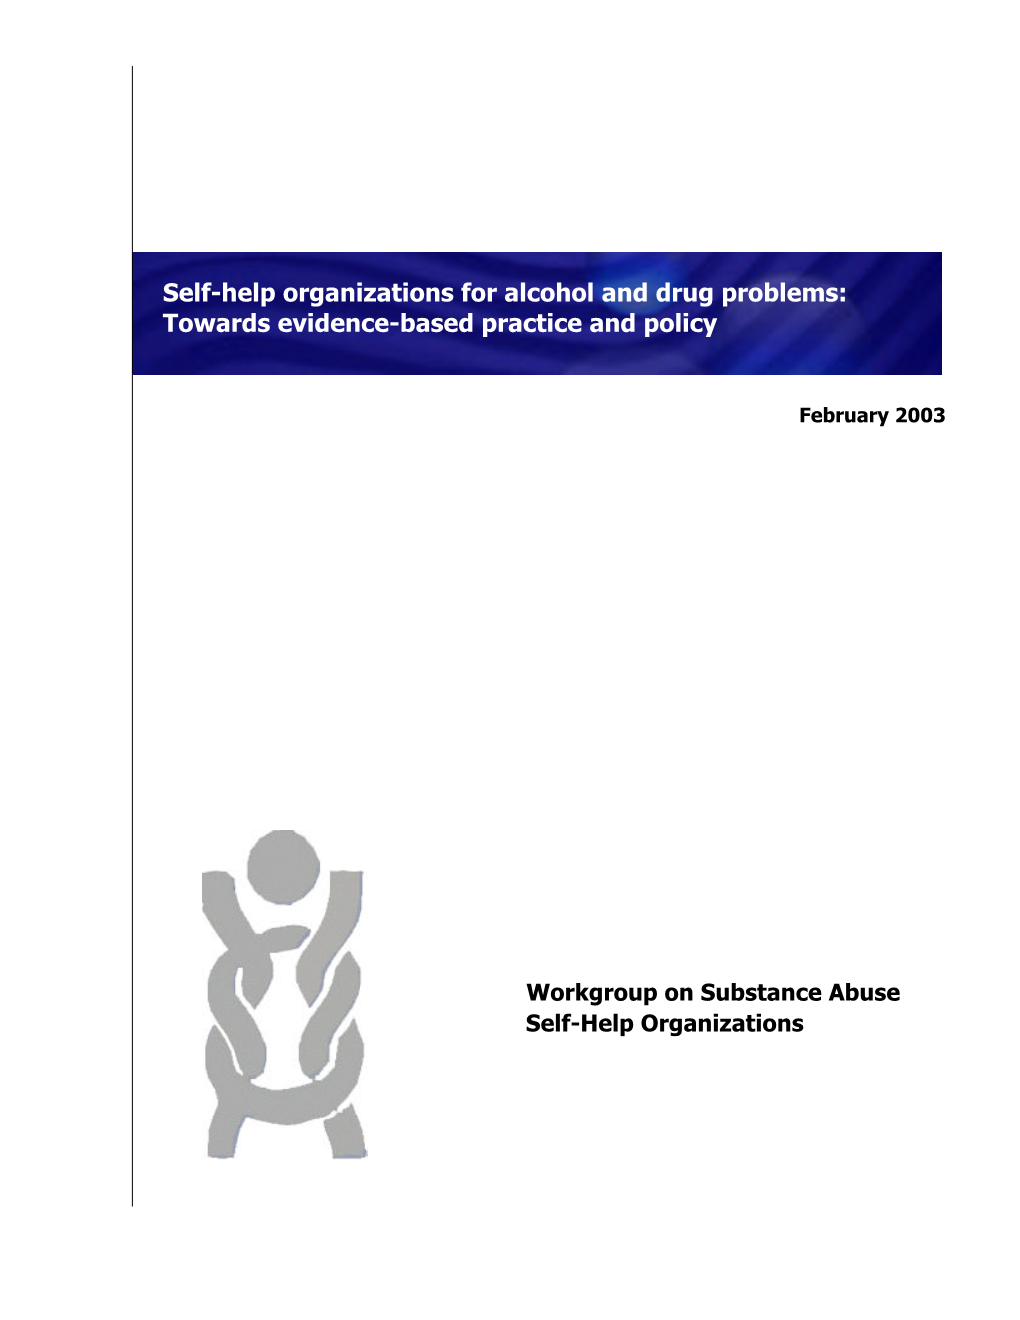 Self-Help Organizations for Alcohol and Drug Problems: Towards Evidence-Based Practice and Policy